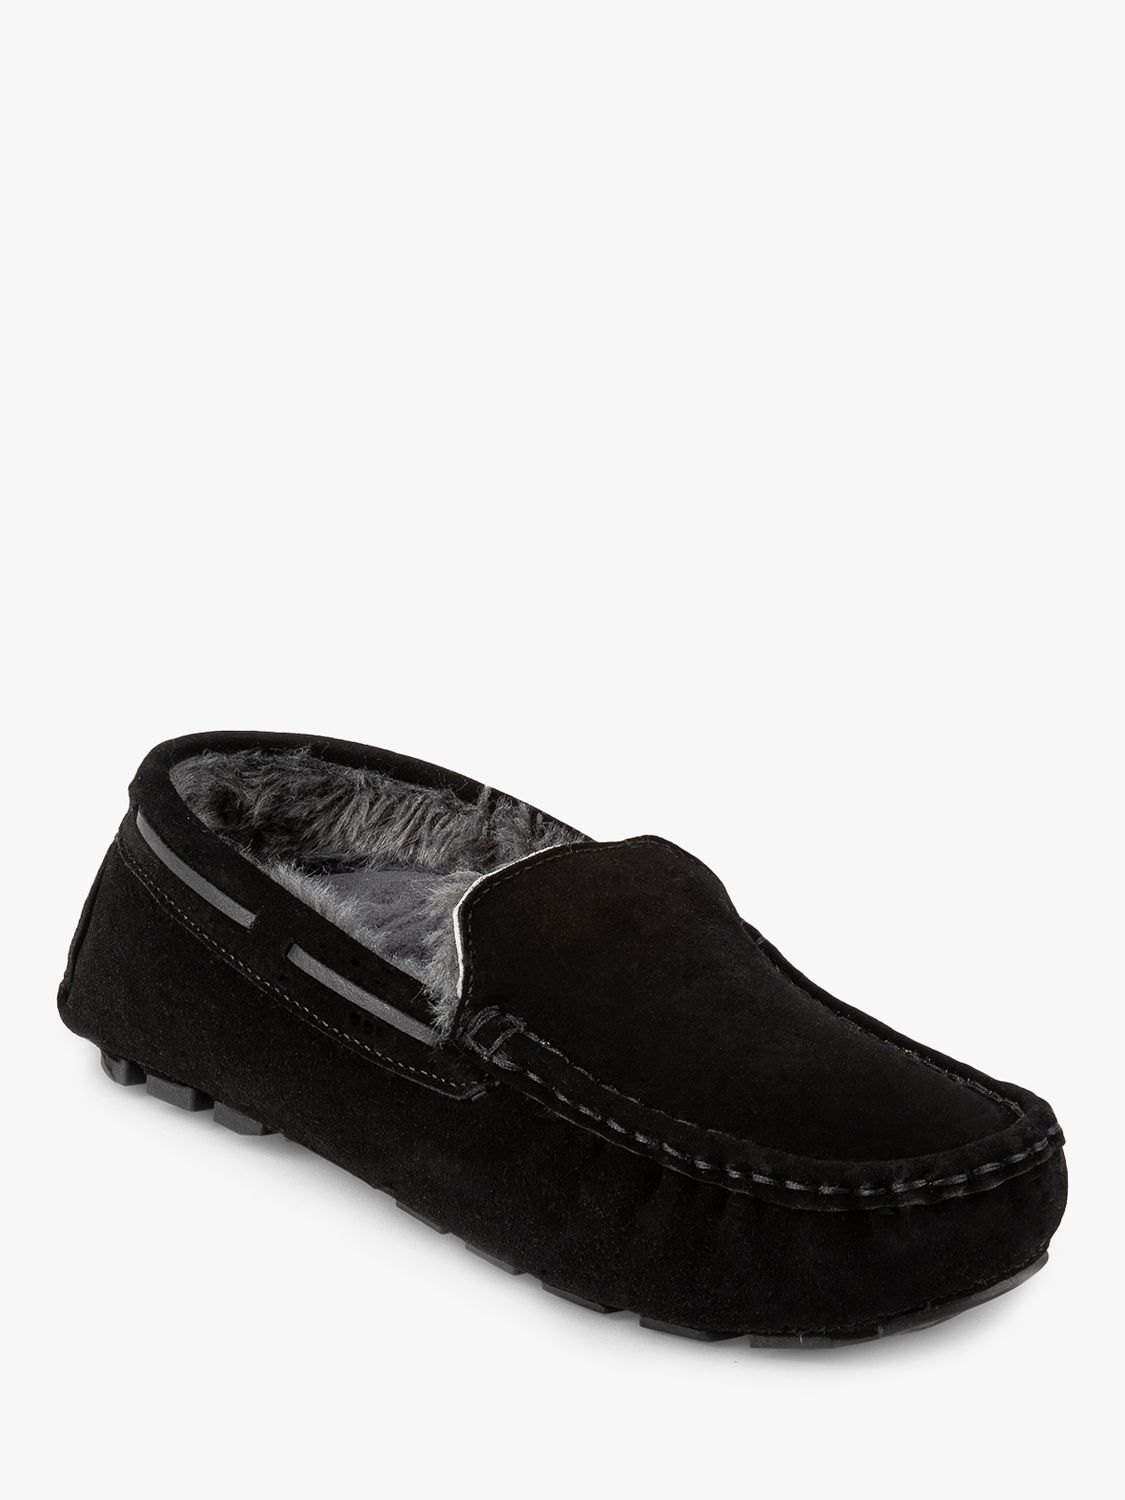 totes Isotoner Suede Moccasin Slippers, Black, 8